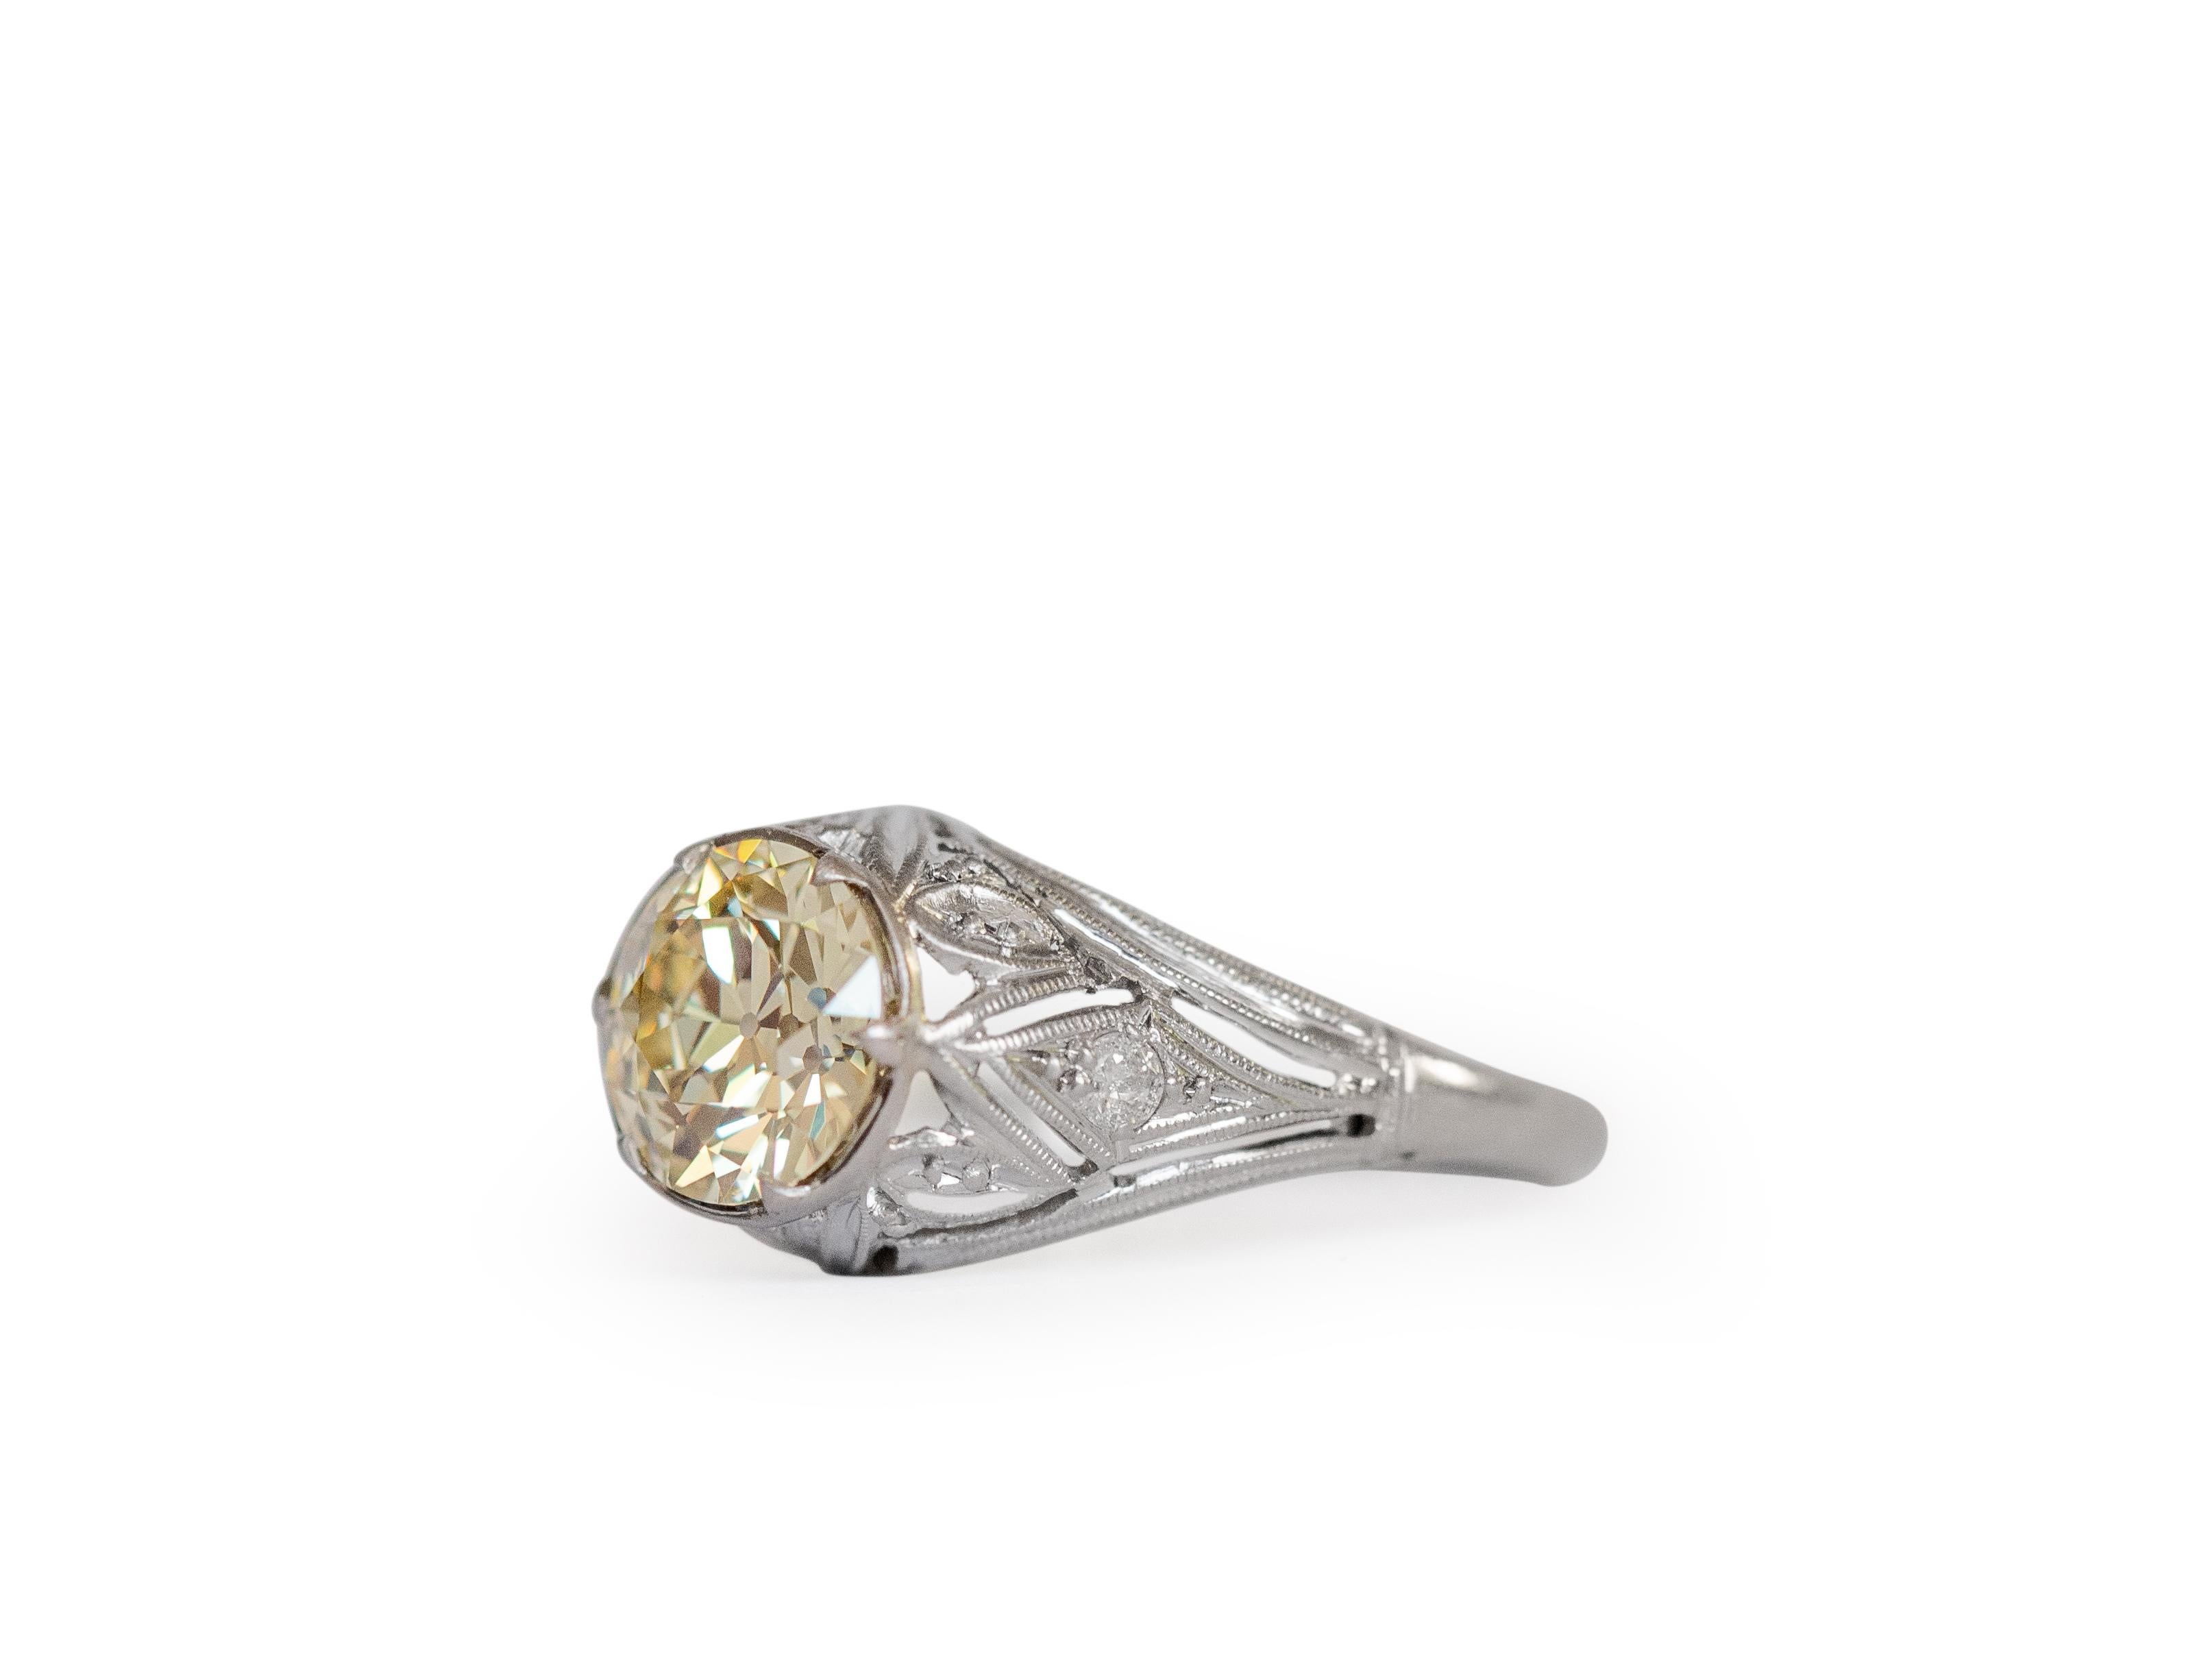 Ring Size: 5
Metal Type: Platinum  [Hallmarked, and Tested]
Weight:  3 grams

Center Diamond Details:

Weight: 1.42 carat
Cut: Old European Brilliant
Color: OP (Light Yellow)
Clarity: VS2

Finger to Top of Stone Measurement: 5.5mm
Condition: 